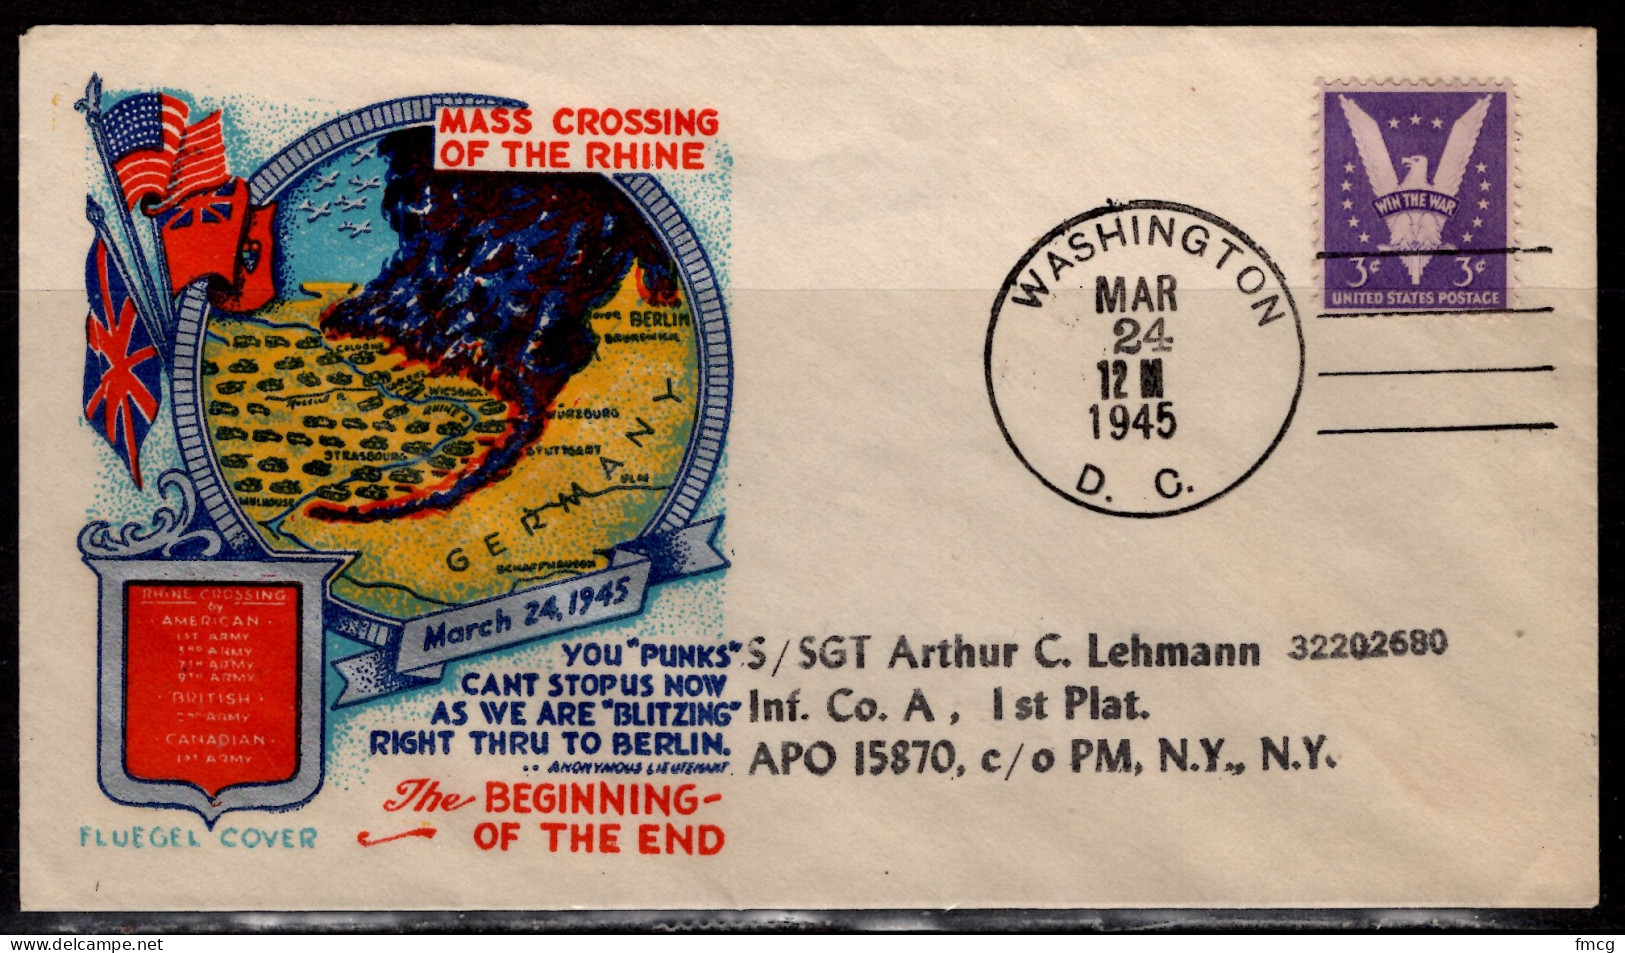 1945 Staehle Cover - World War II, Mass Crossing Of The Rhine, Mar 24 - Covers & Documents